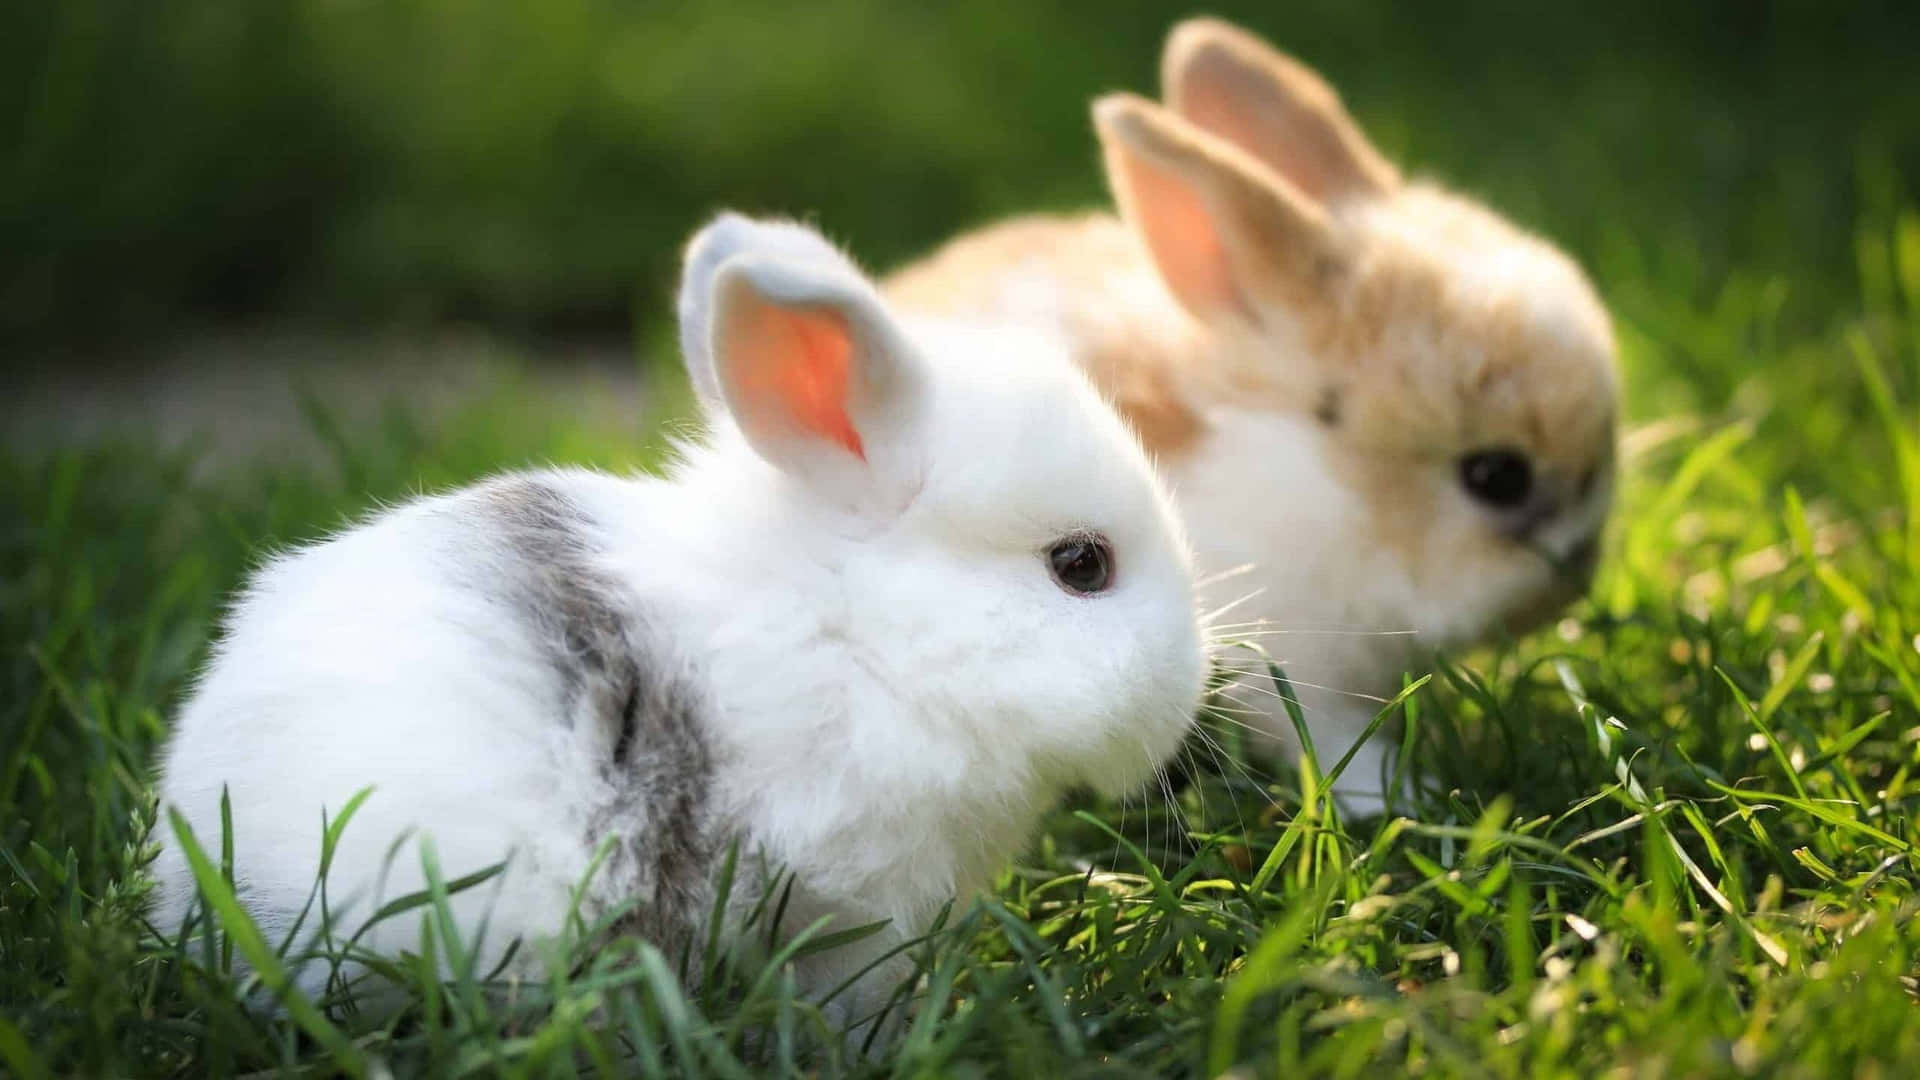 Two cuddly and playful fluffy bunnies enjoying their time together. Wallpaper